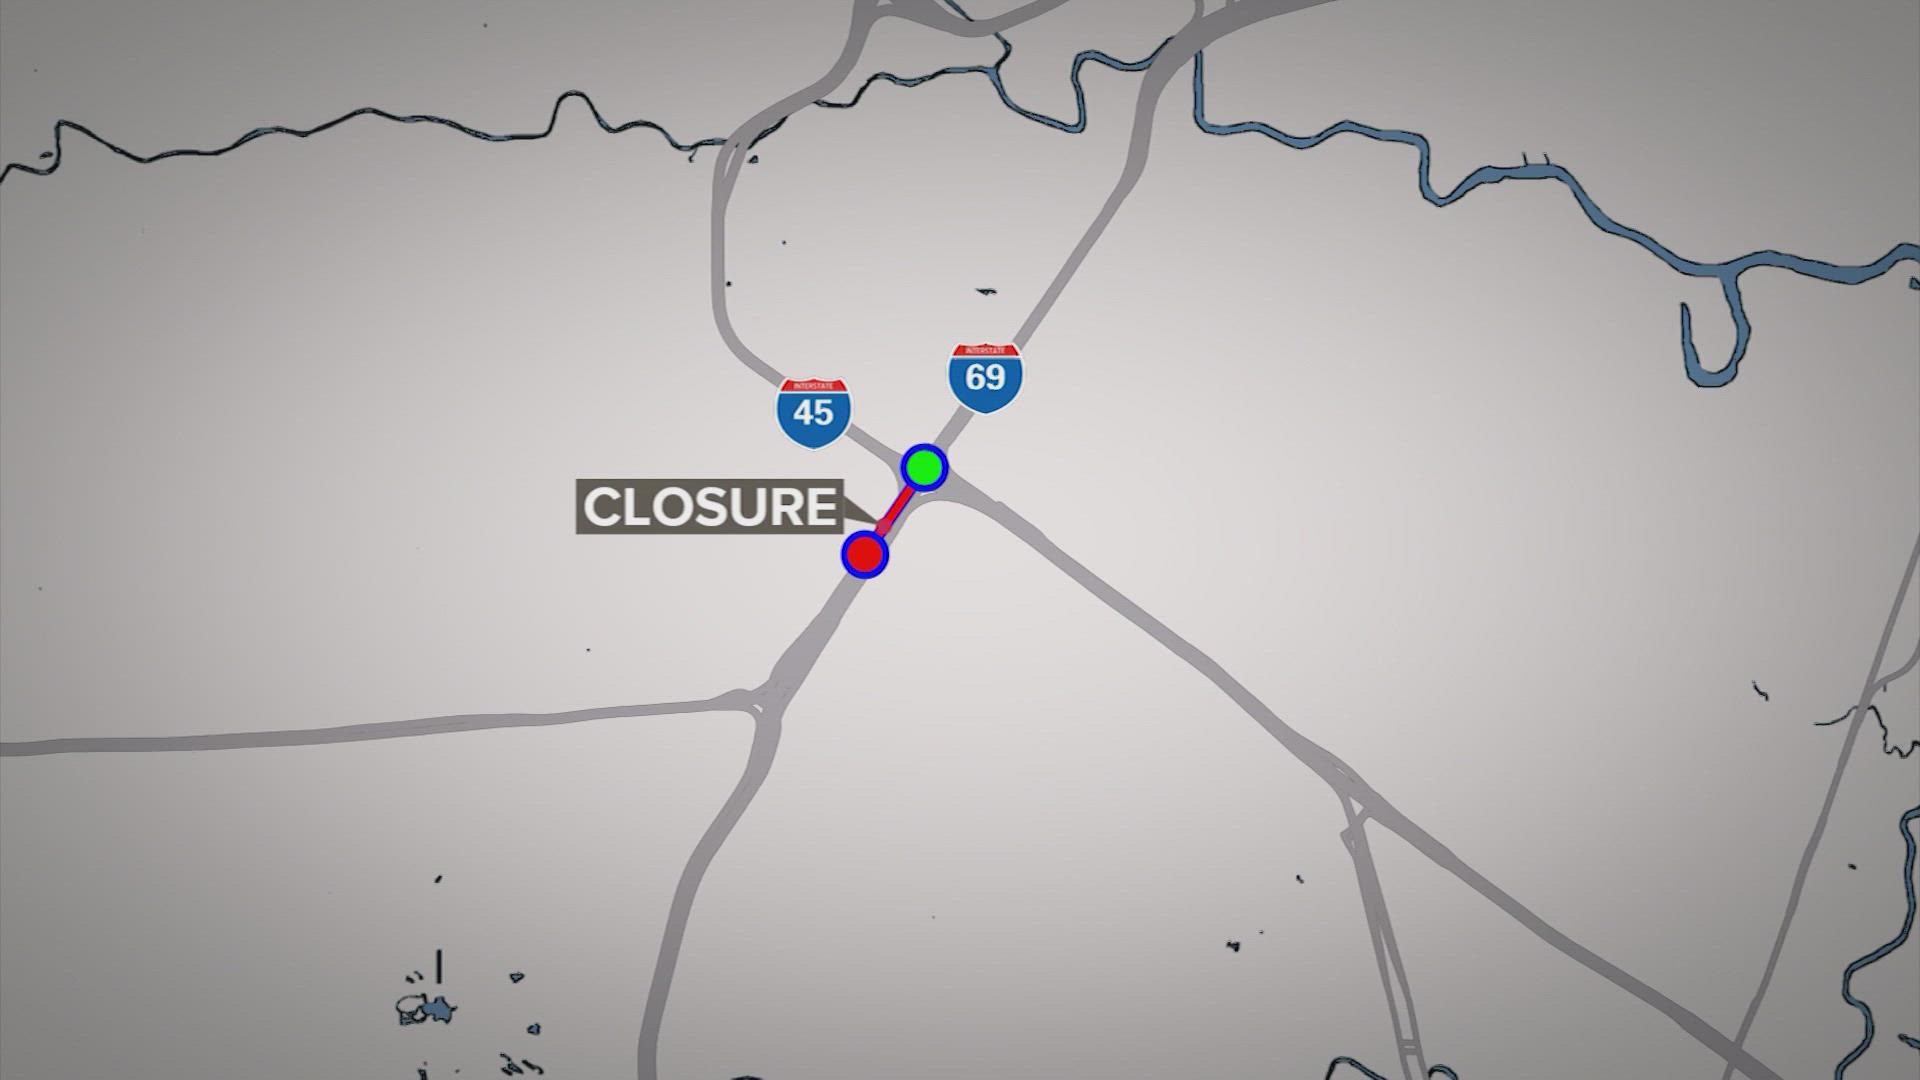 All of the southbound lanes of the I-69/Eastex Freeway at I-45/North Freeway will be closed for construction starting at 9 p.m. Friday.